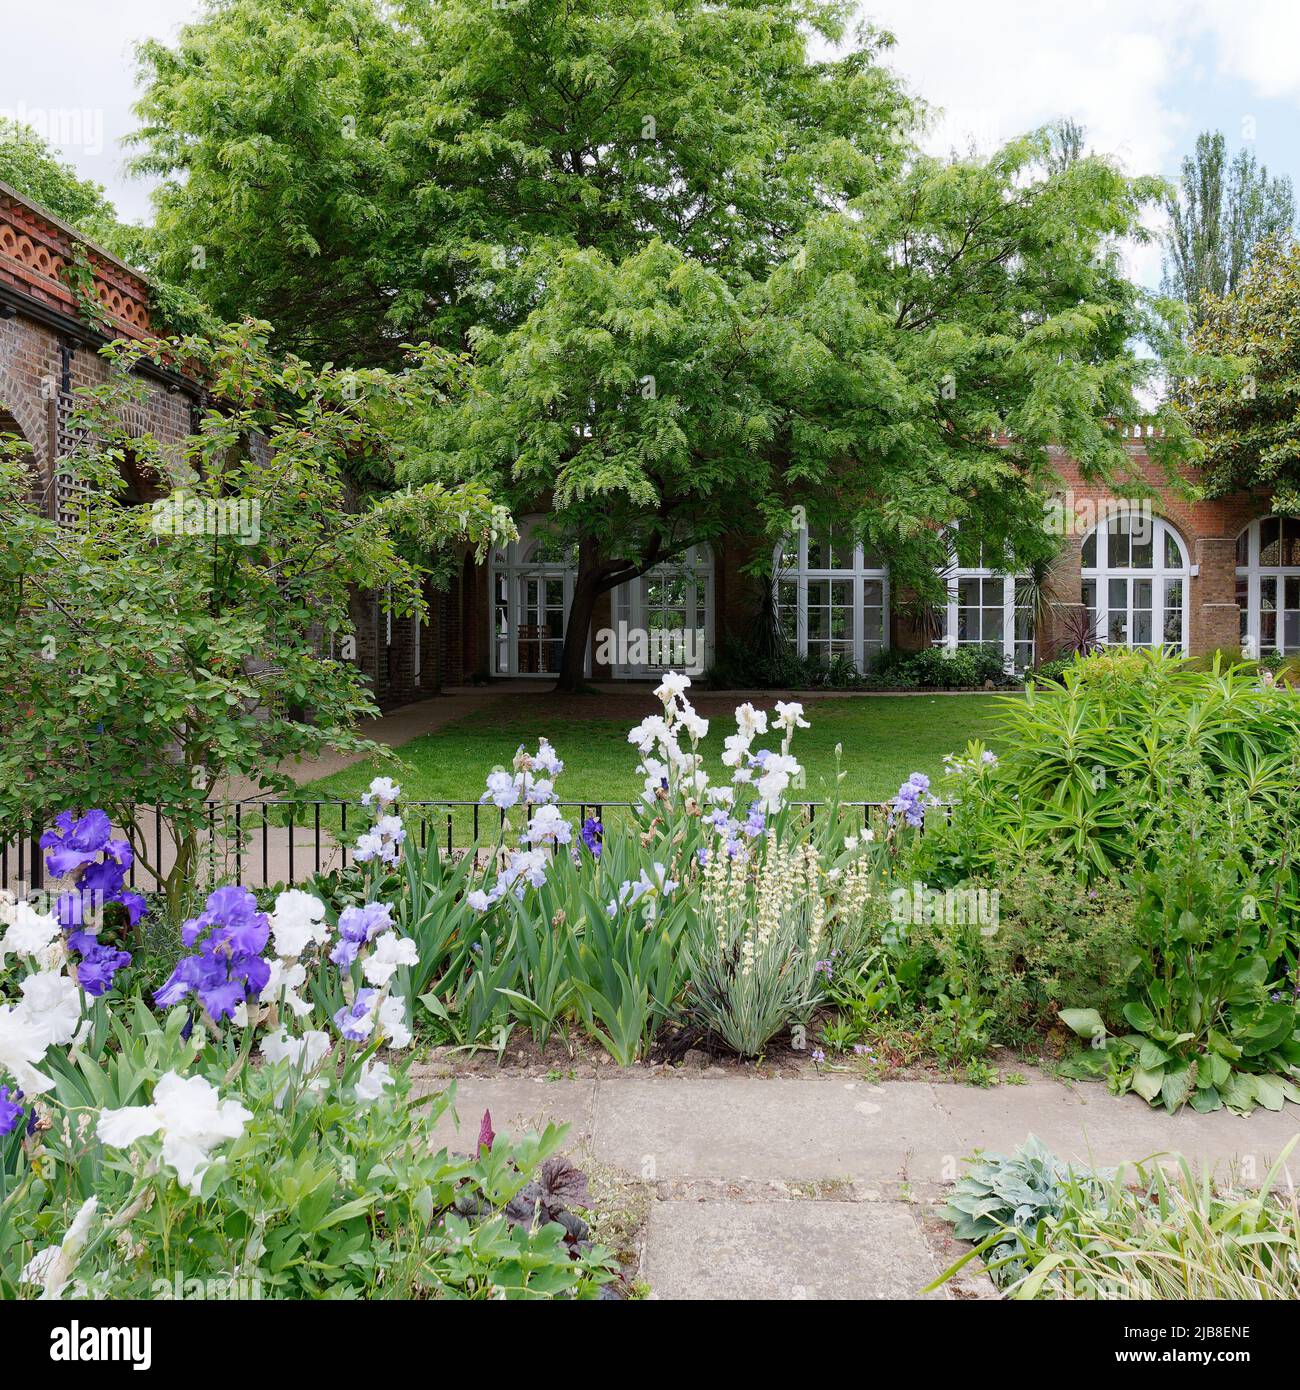 London, Greater London, England, May 28 2022: Lawned garden and Orangery at Holland Park in the Kensington area. Stock Photo